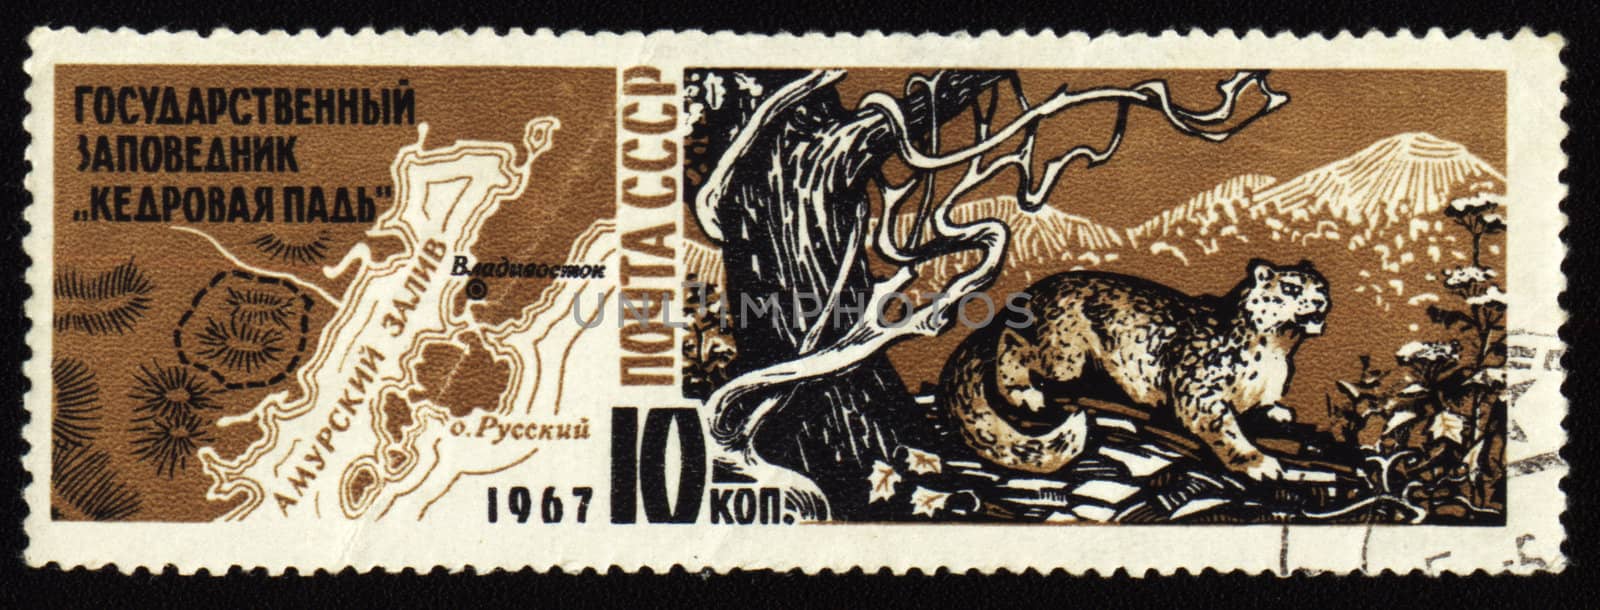 Cedar Pad reserve in USSR on post stamp by wander